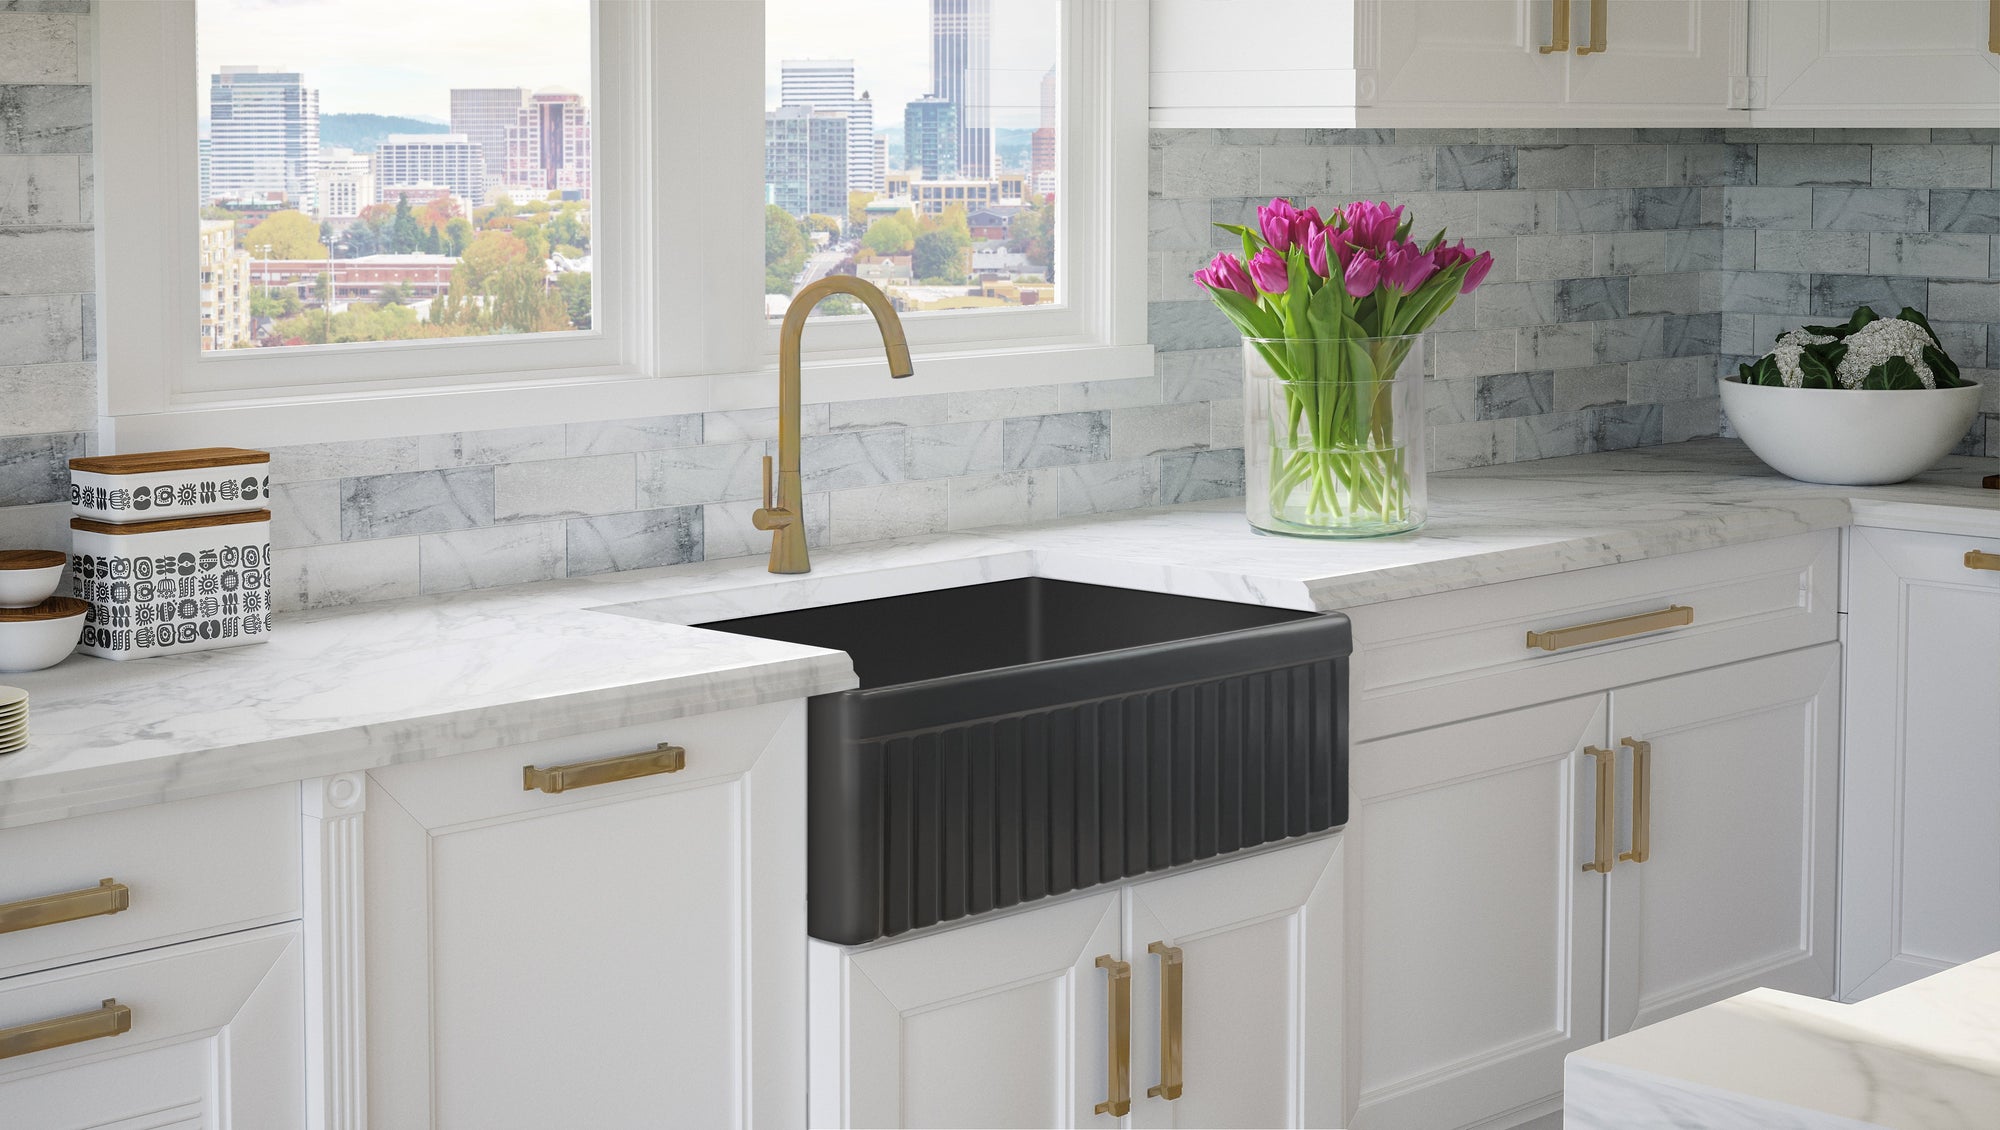 FSW1027BB LUXURY 33-INCH SOLID FIRECLAY FARMHOUSE SINK, MATTE BLACK, MATTE GOLD ACCS, FLUTED FRONT